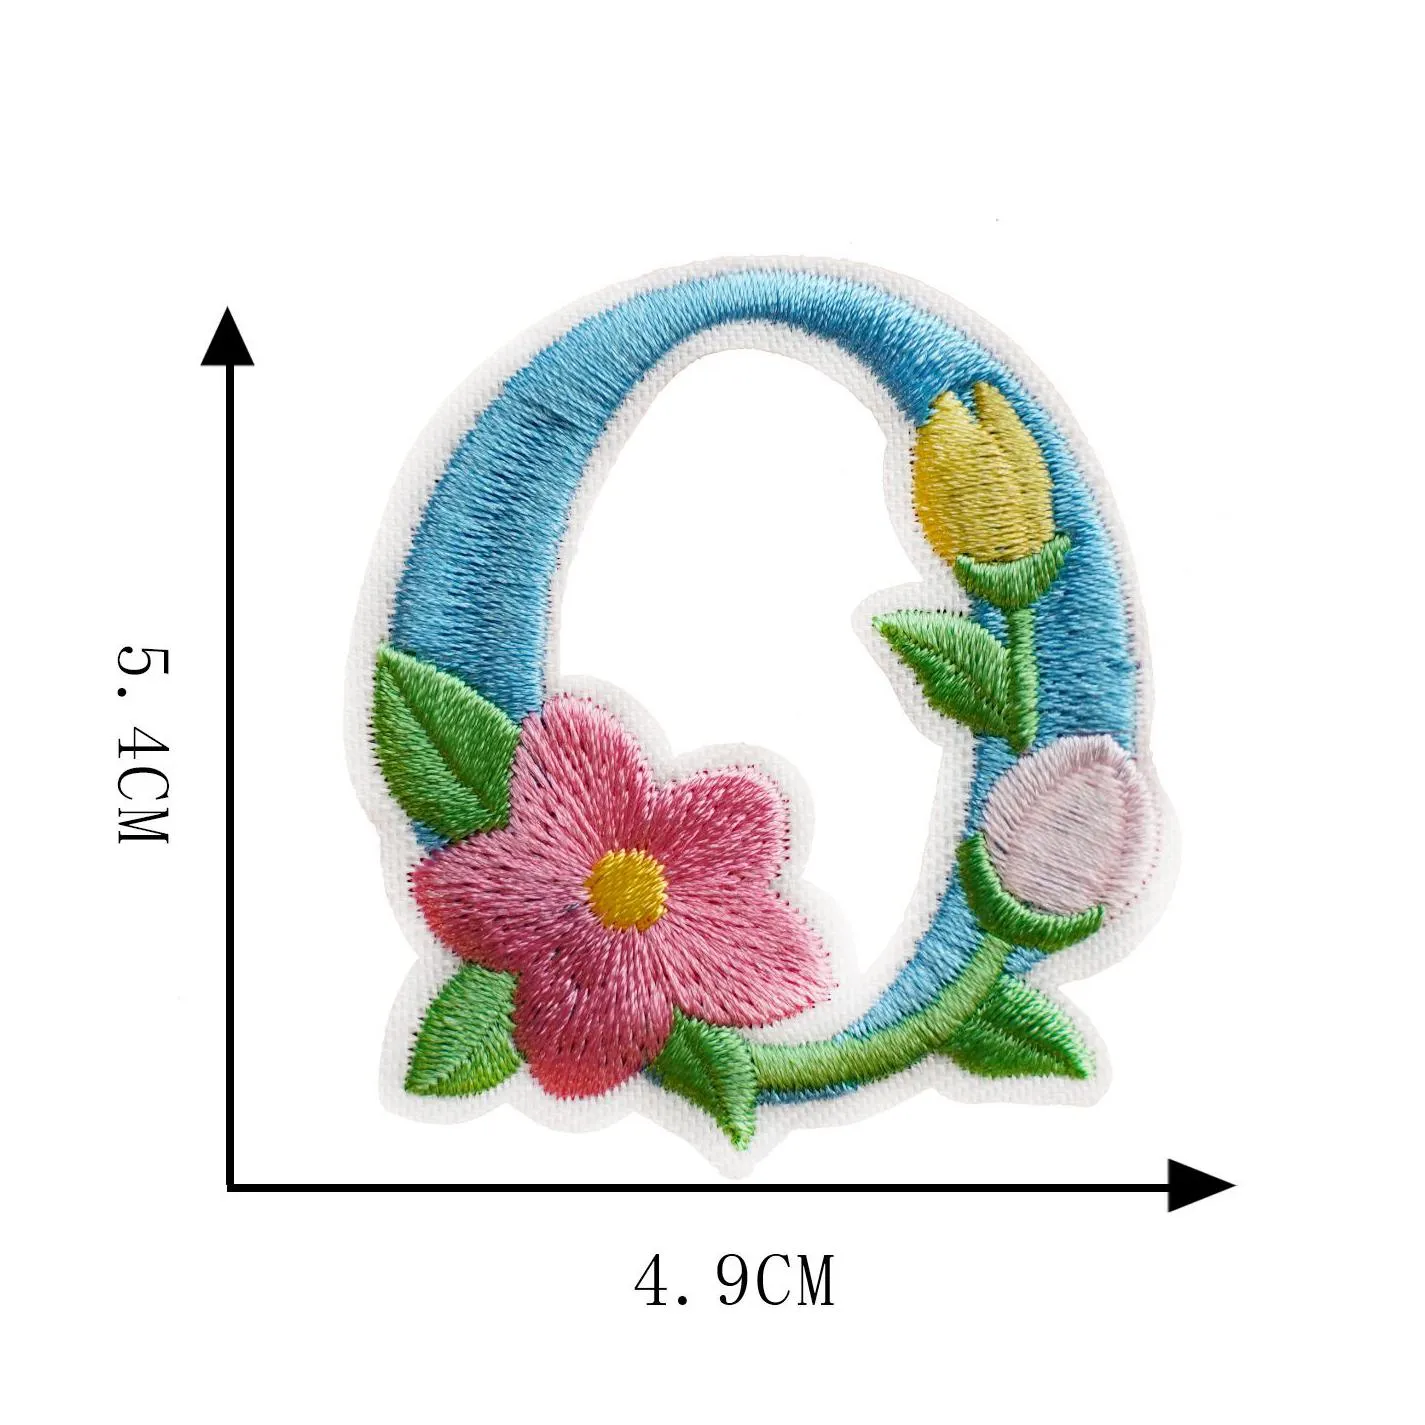 iron on flower letteres sewing notion embroidered letters a-z colorful flowers shape alphabet applique for clothes hat shirts bags diy